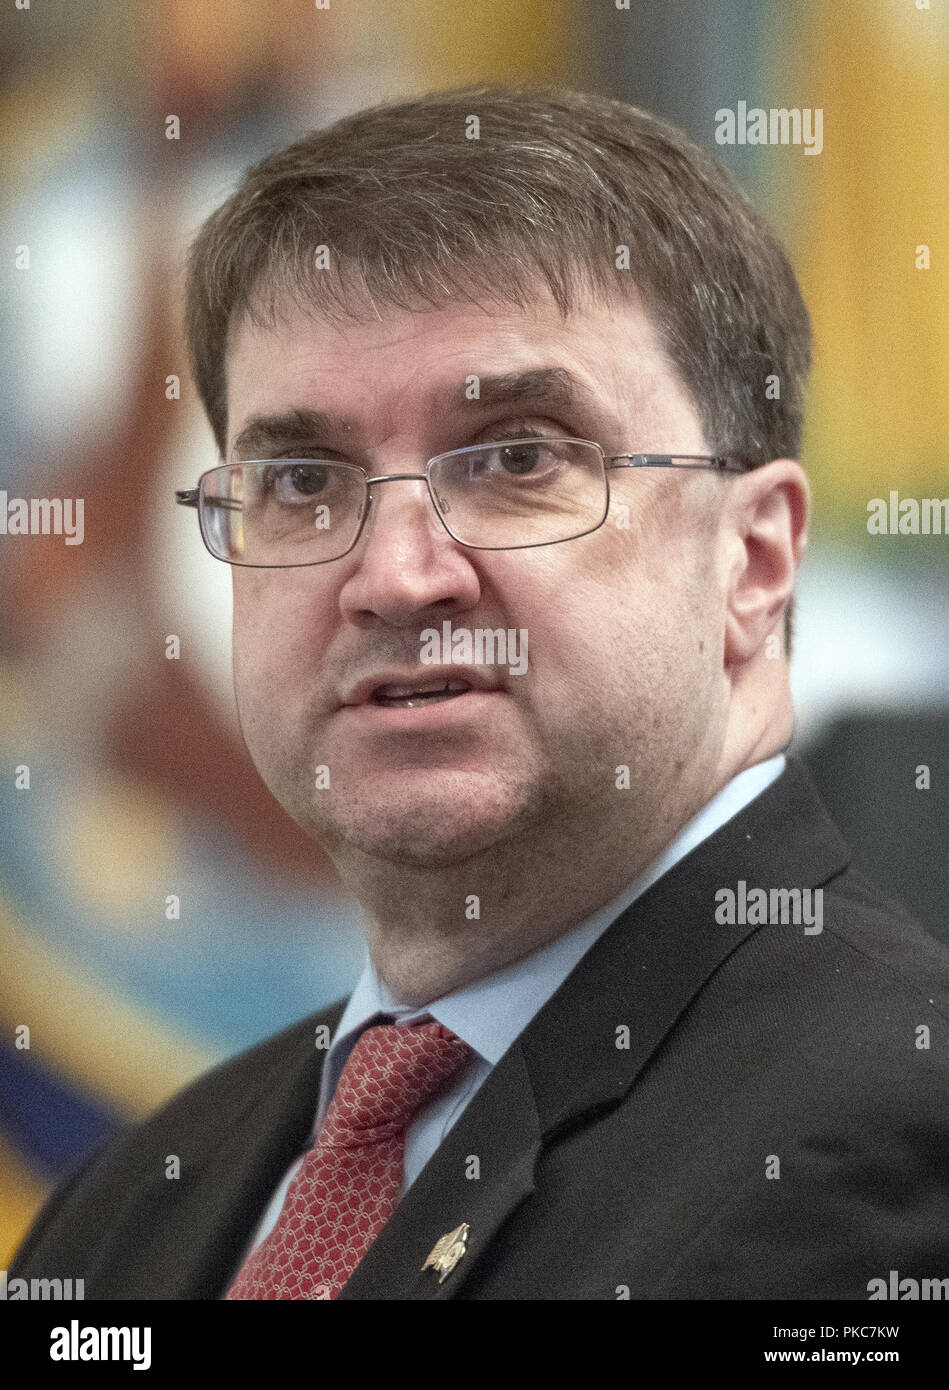 Washington, District of Columbia, USA. 12th Sep, 2018. United States Secretary of Veterans Affairs Robert Wilkie, prior to the arrival of US President Donald J. Trump who will make remarks at the Congressional Medal of Honor Society Reception in the East Room of the White House in Washington, DC on Wednesday, September 12, 2018 Credit: Ron Sachs/CNP/ZUMA Wire/Alamy Live News Stock Photo